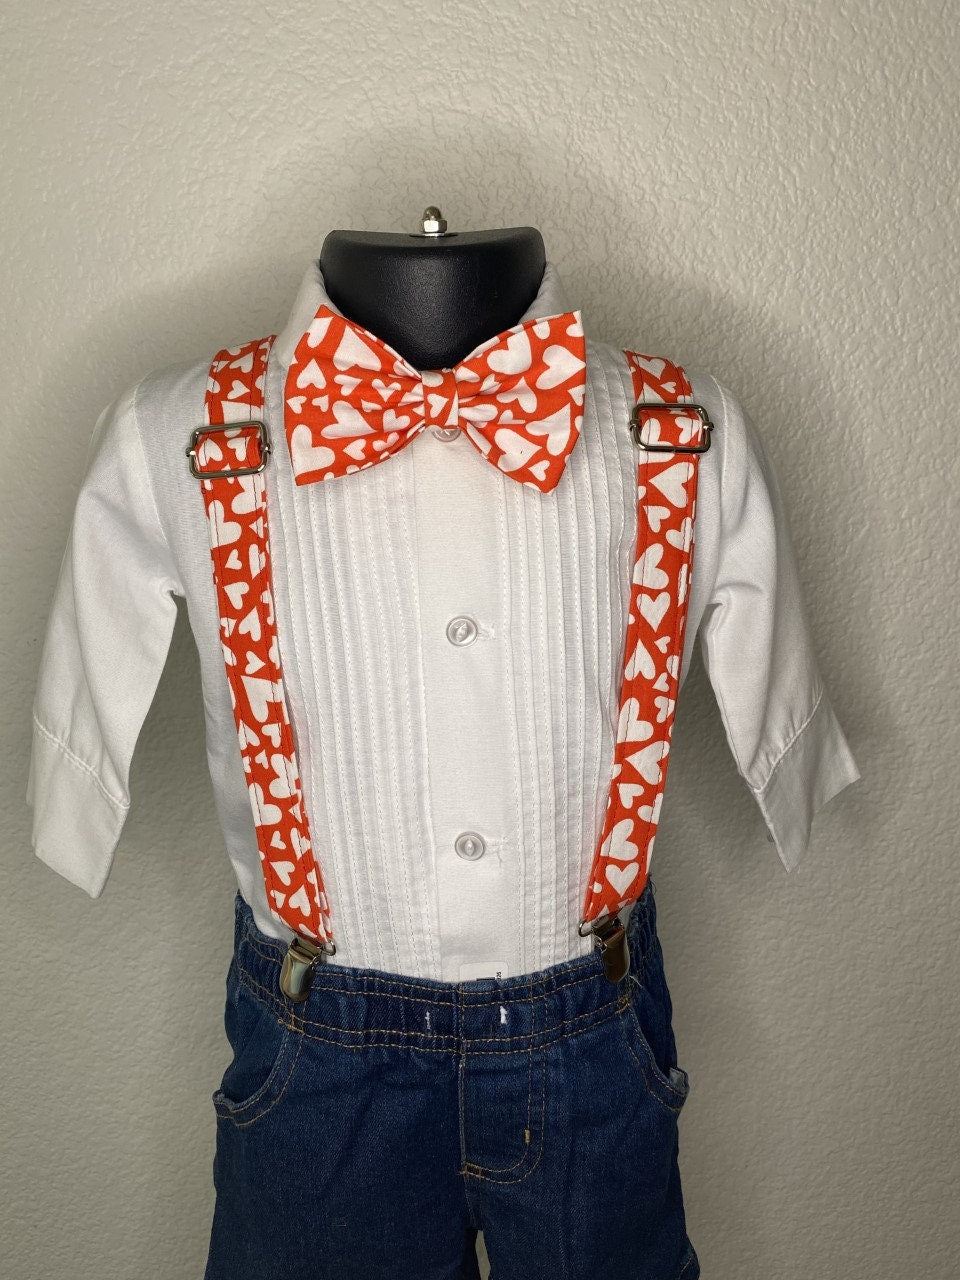 Red and white hearts bow tie and suspenders custom adjustable Velcro birthday outfit photo prop bowtie Wedding special occasion church